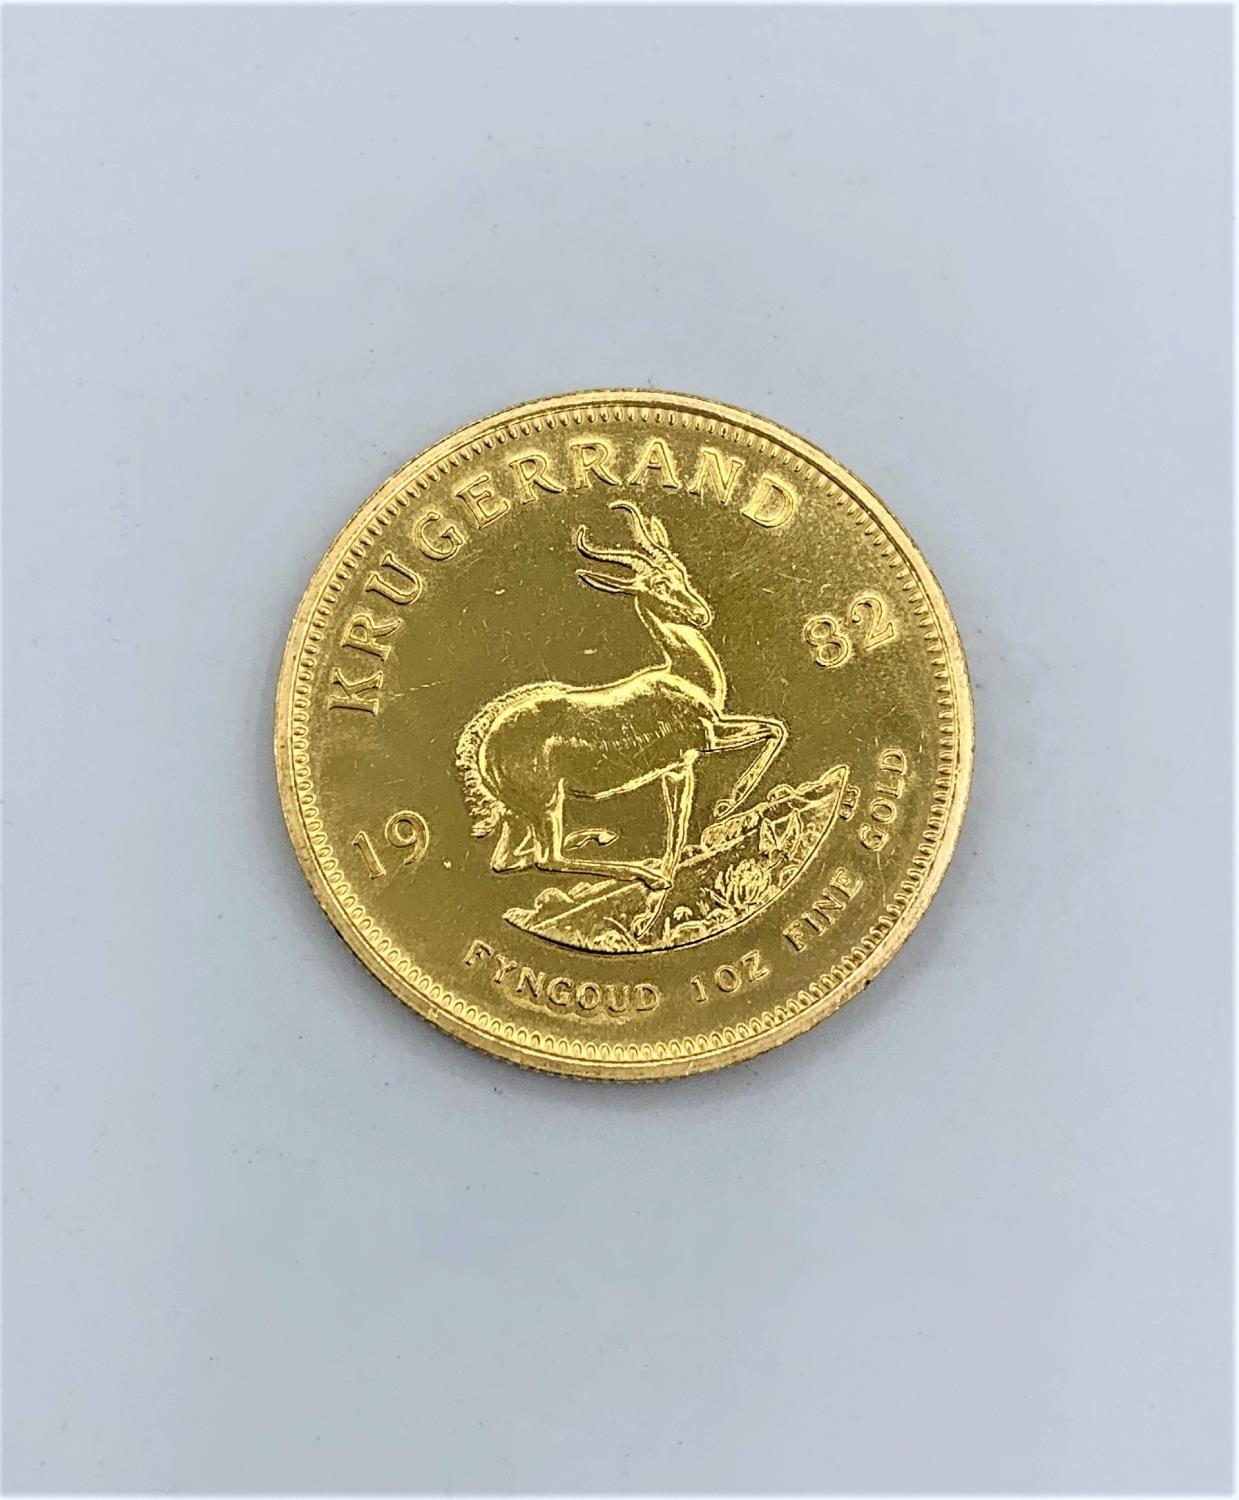 Krugerrand Coin Minted in 1982 CI03 Fine Gold